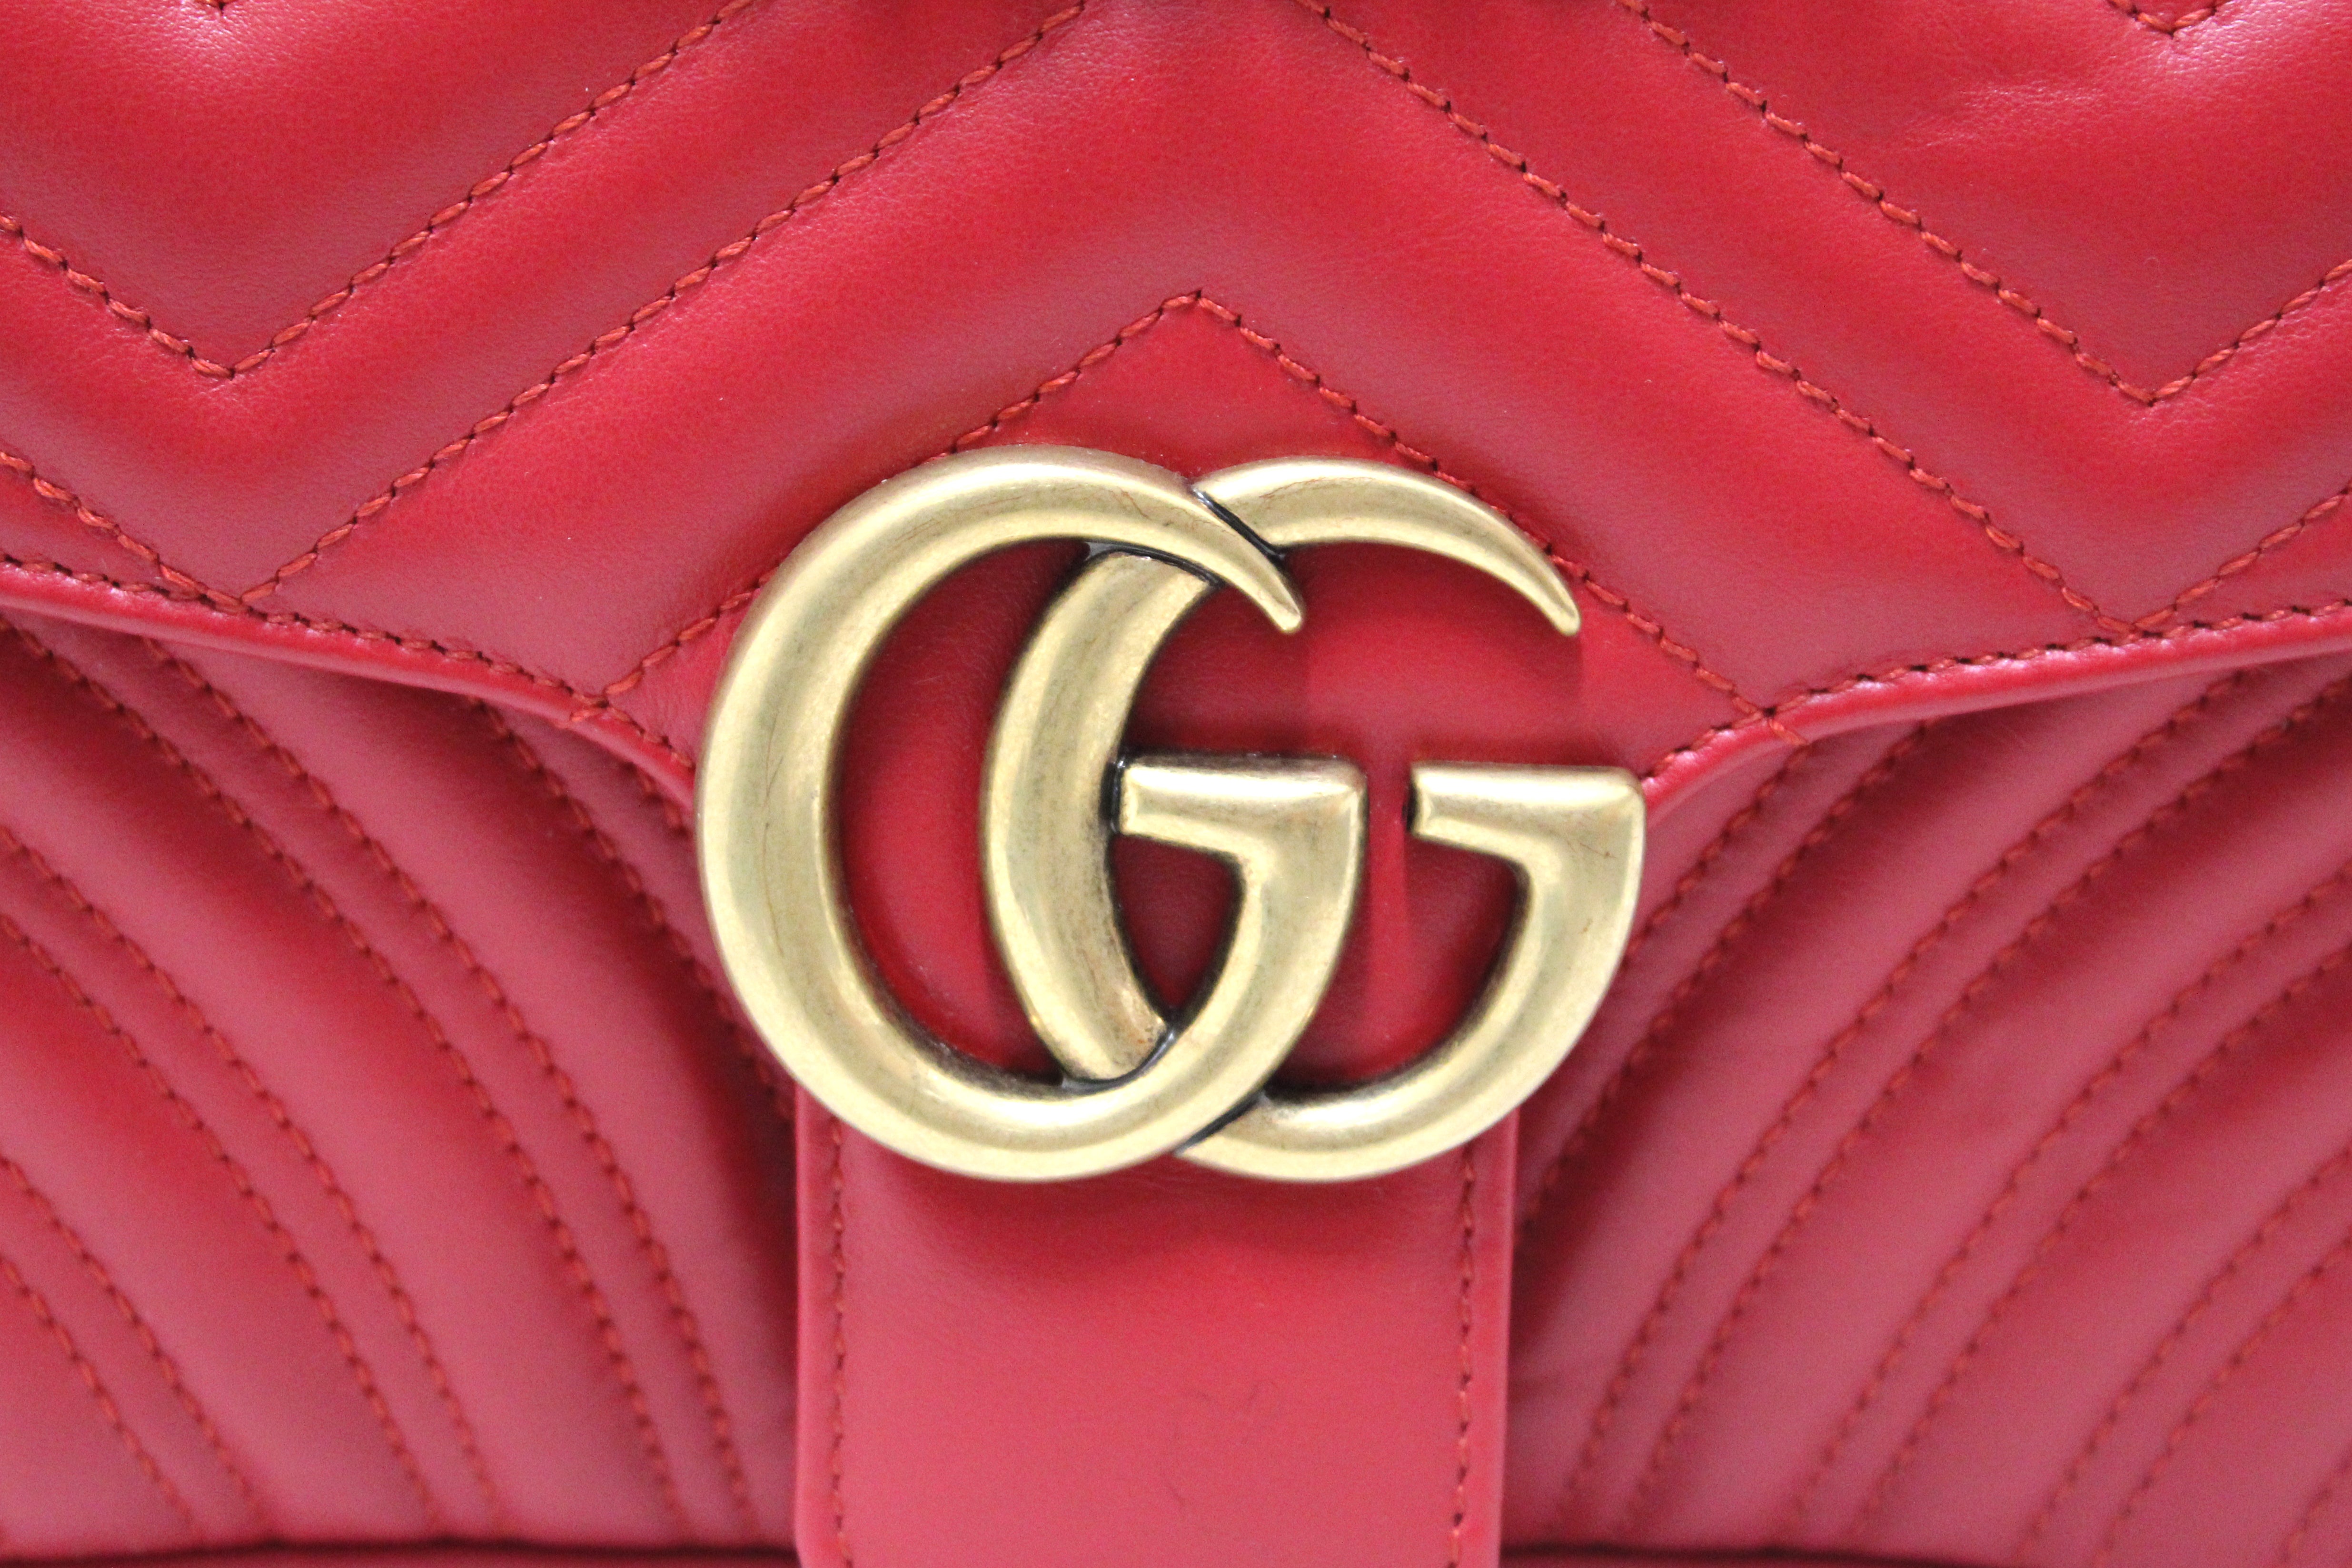 Authentic Gucci GG Red Marmont Small Matelassé Leather Shoulder Bag